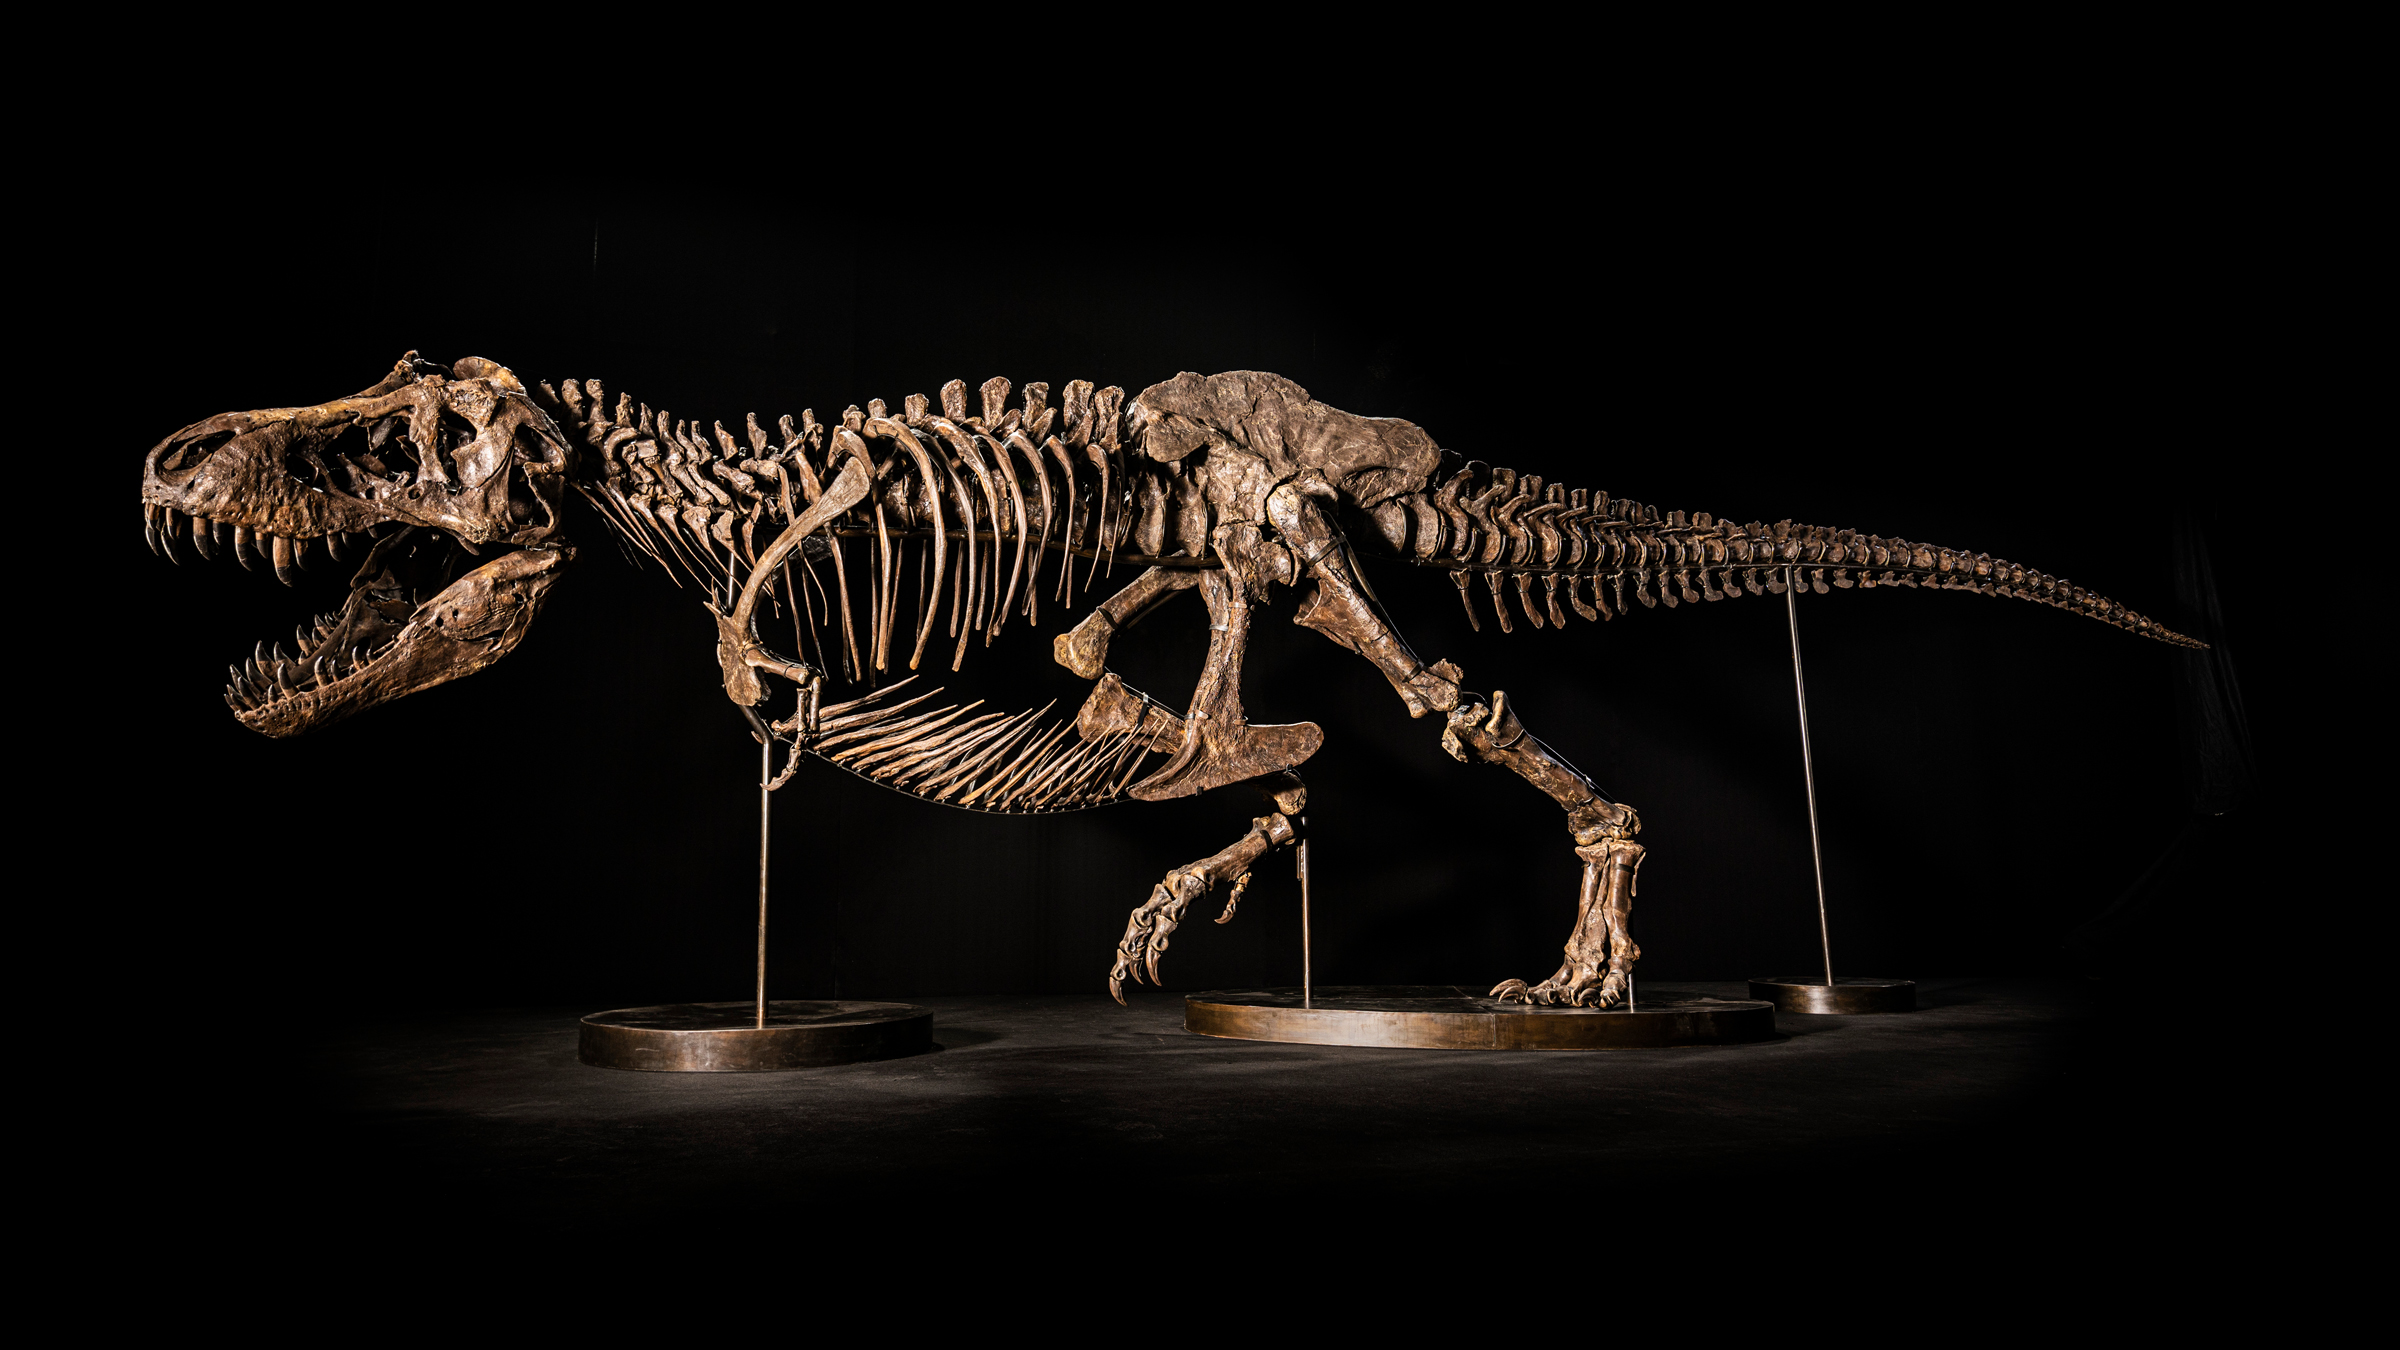 Spectacular T. rex skeleton may fetch $25 million at auction (the new owner gets to name it, too)